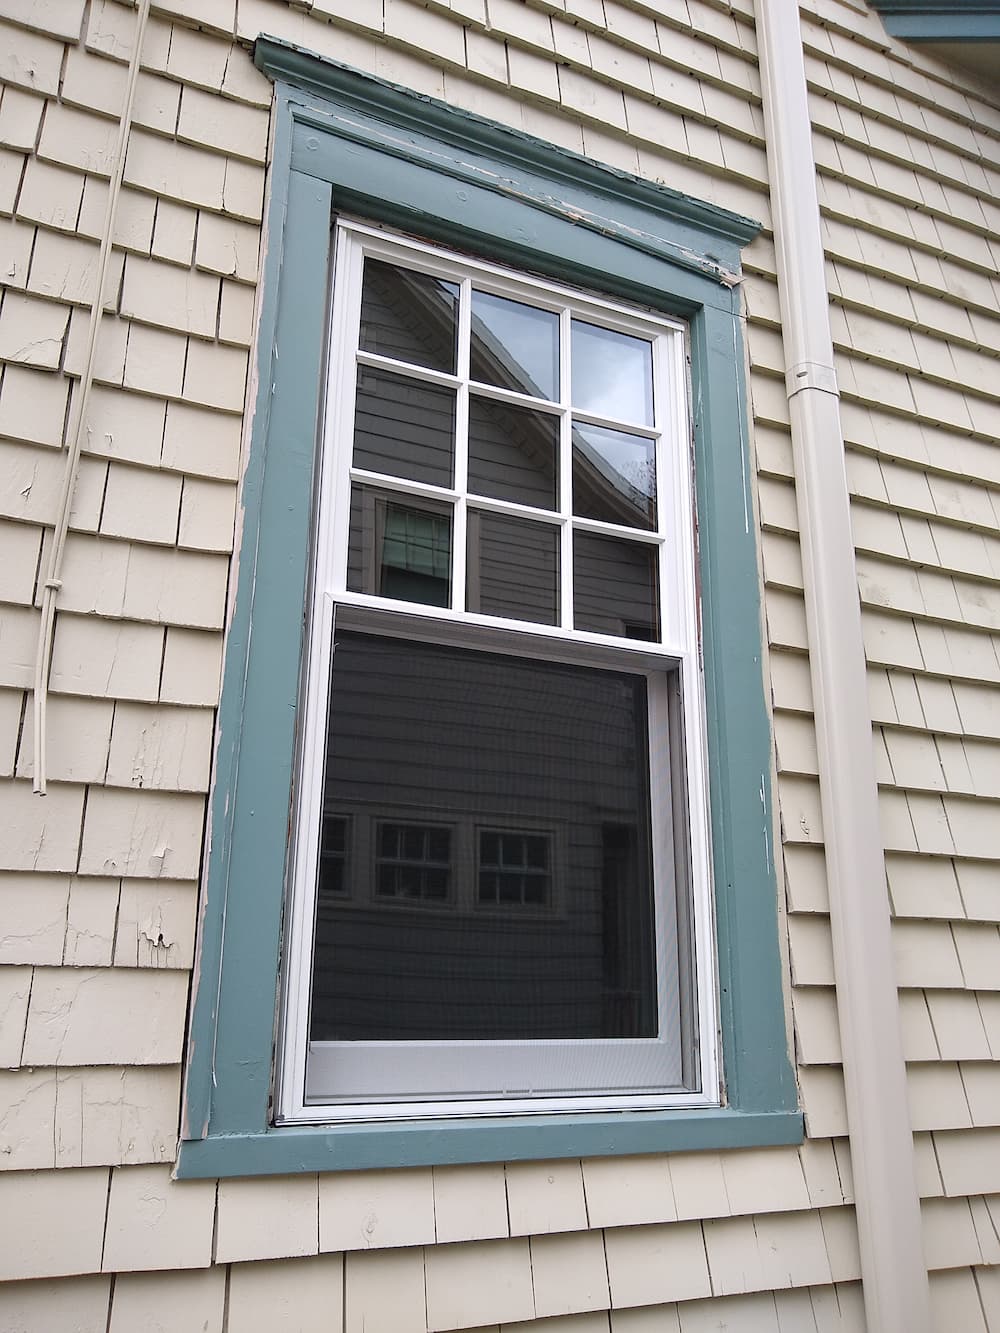 After view of side exterior window